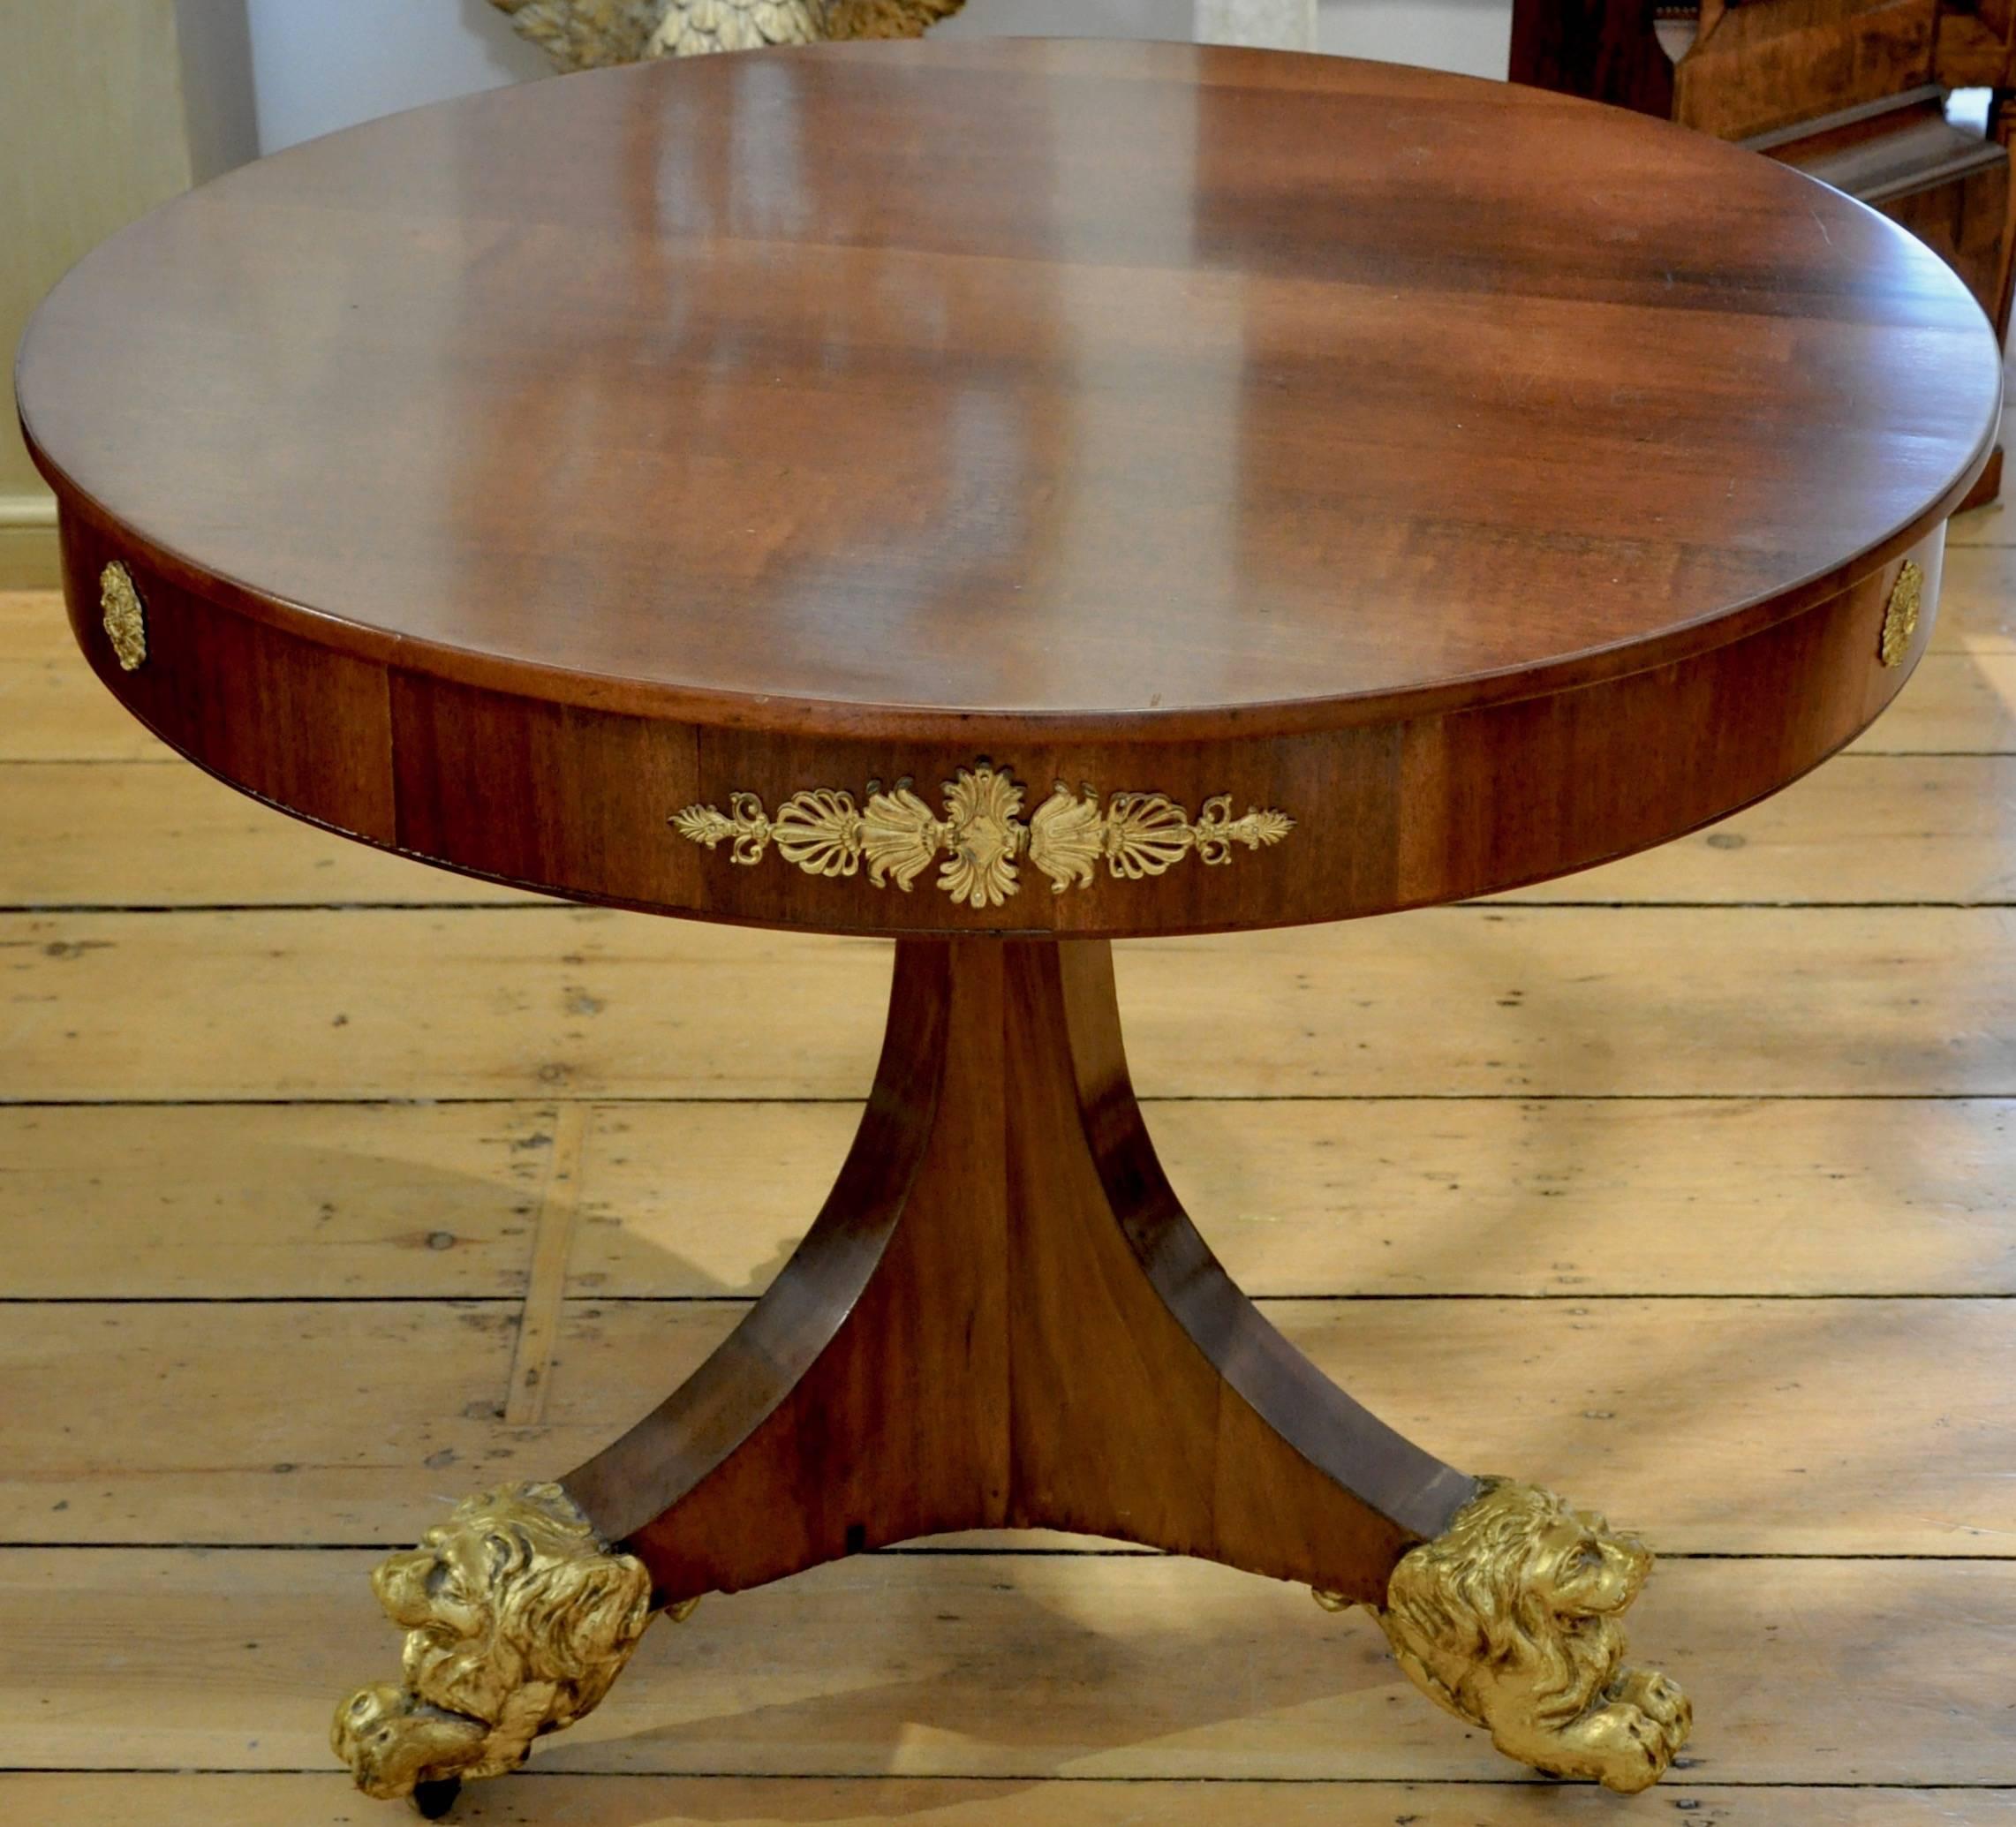 19th century Neoclassical Mahogany center table

--Northern Continental or Danish
--Ormolu mounts and gilt carved wood lion feet
--Great size.